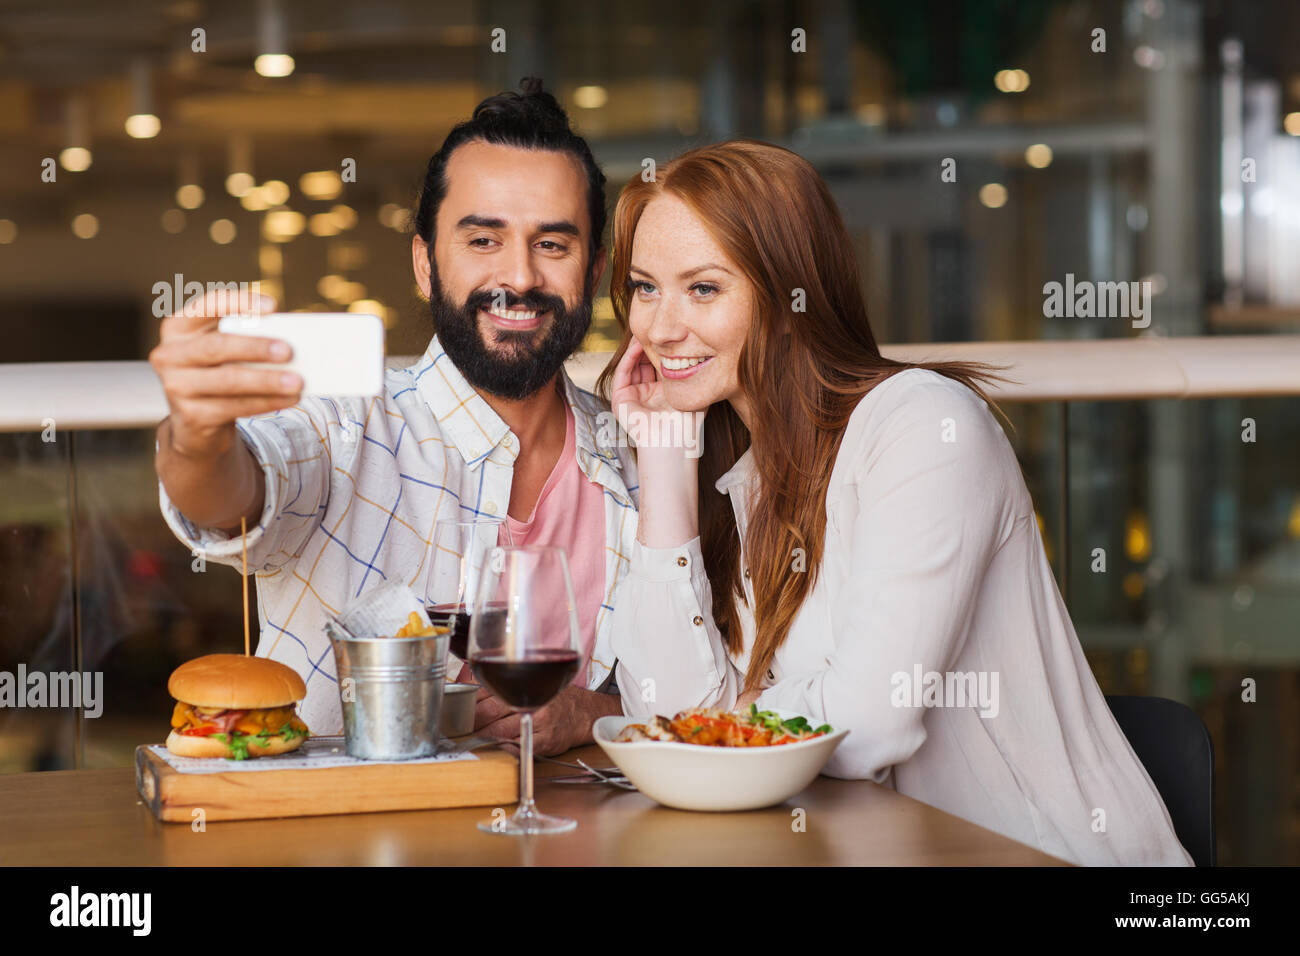 couple taking selfie by smartphone at restaurant Stock Photo